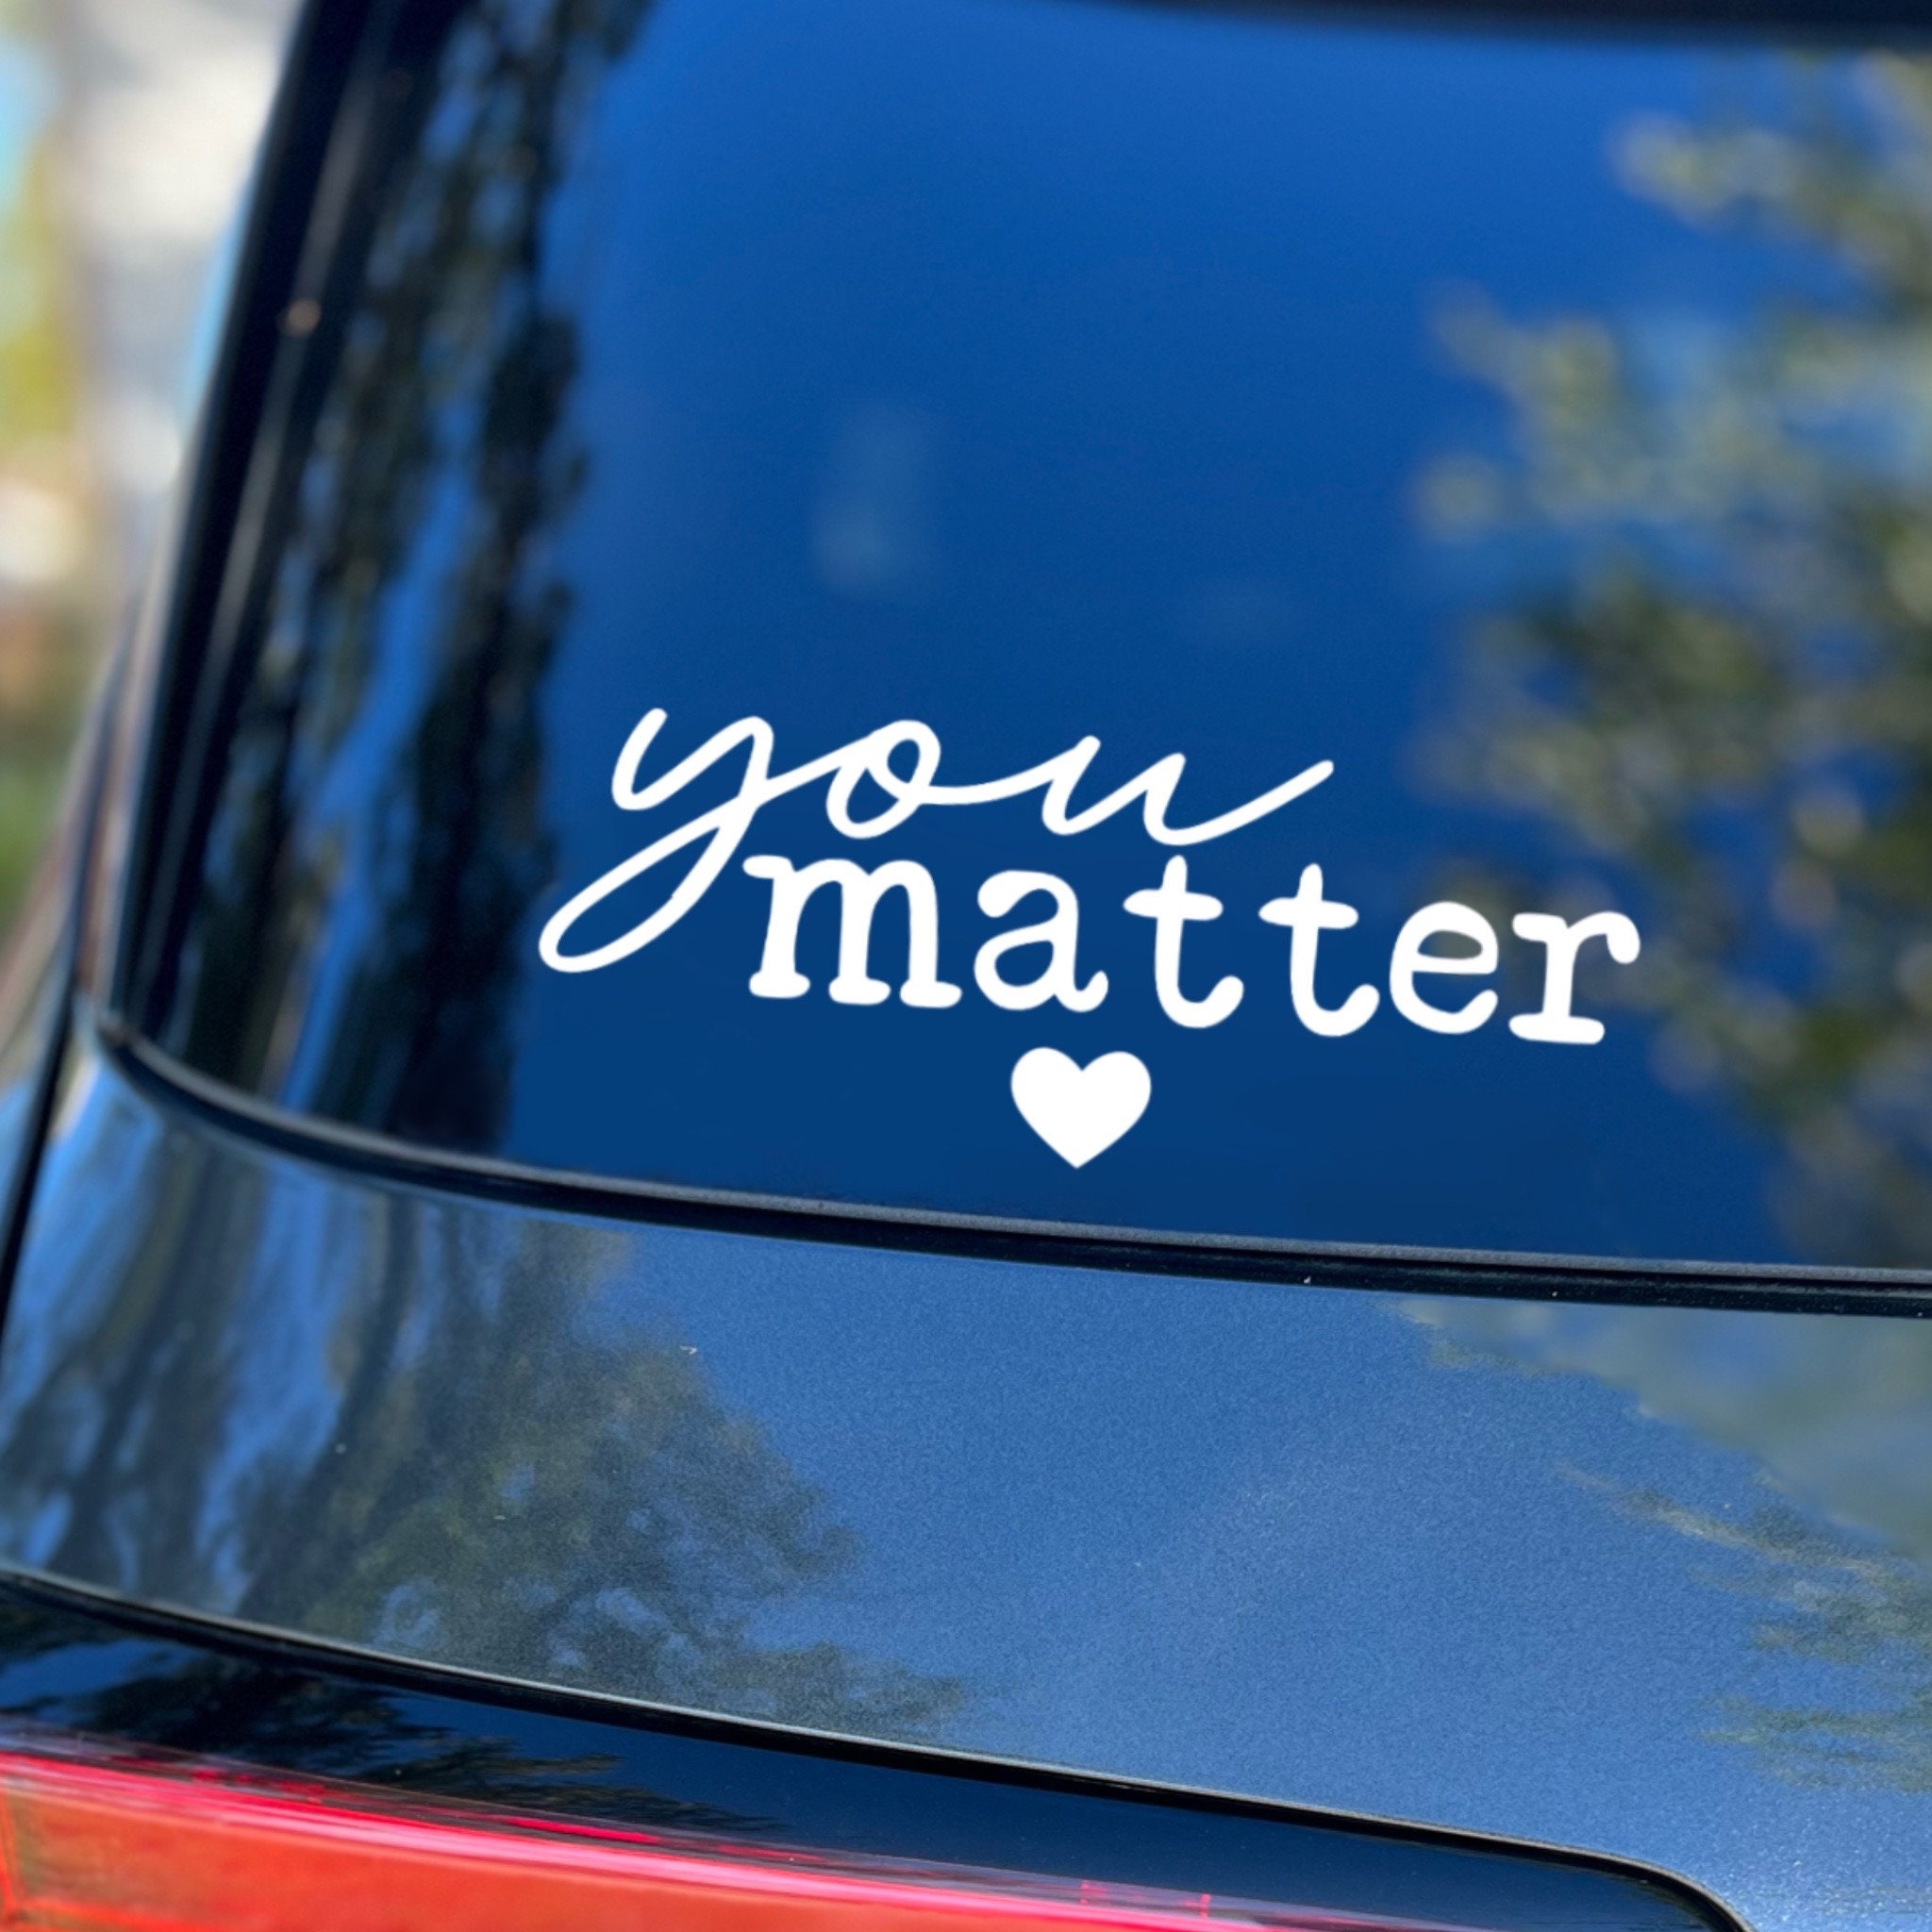 You Look Great Car Mirror Decal, Looking Good Rear View Mirror Cling,  Positivity Car Mirror Vinyl Sticker, Smile Face, Self Love, Gift Idea 